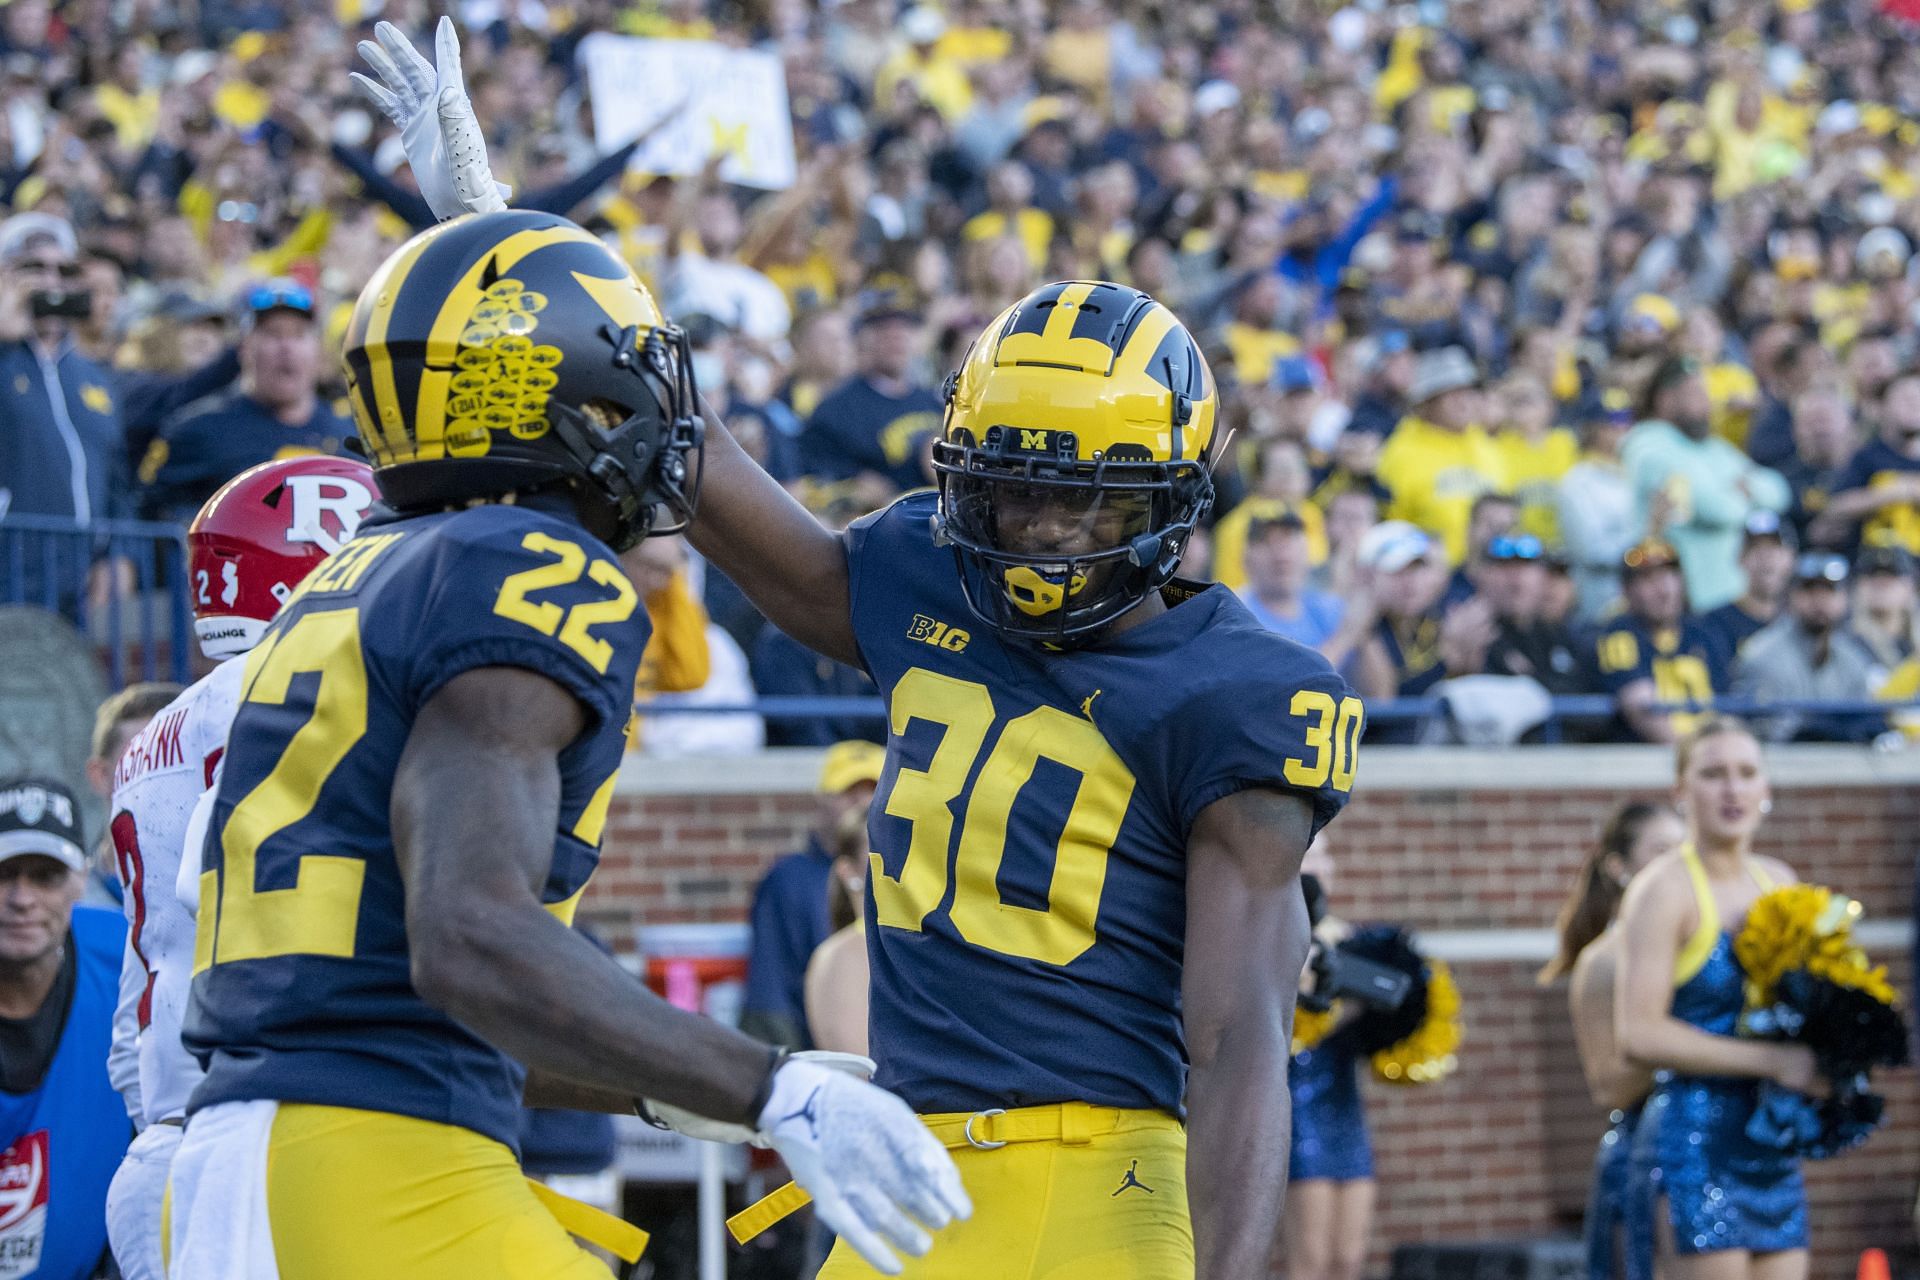 Defensive back Daxton Hill #30 and defensive back Gemon Green #22 of the Michigan Wolverines celebrate breaking up a pass against the Rutgers Scarlet Knights in the third quarter at Michigan Stadium on September 25, 2021 in Ann Arbor, Michigan.